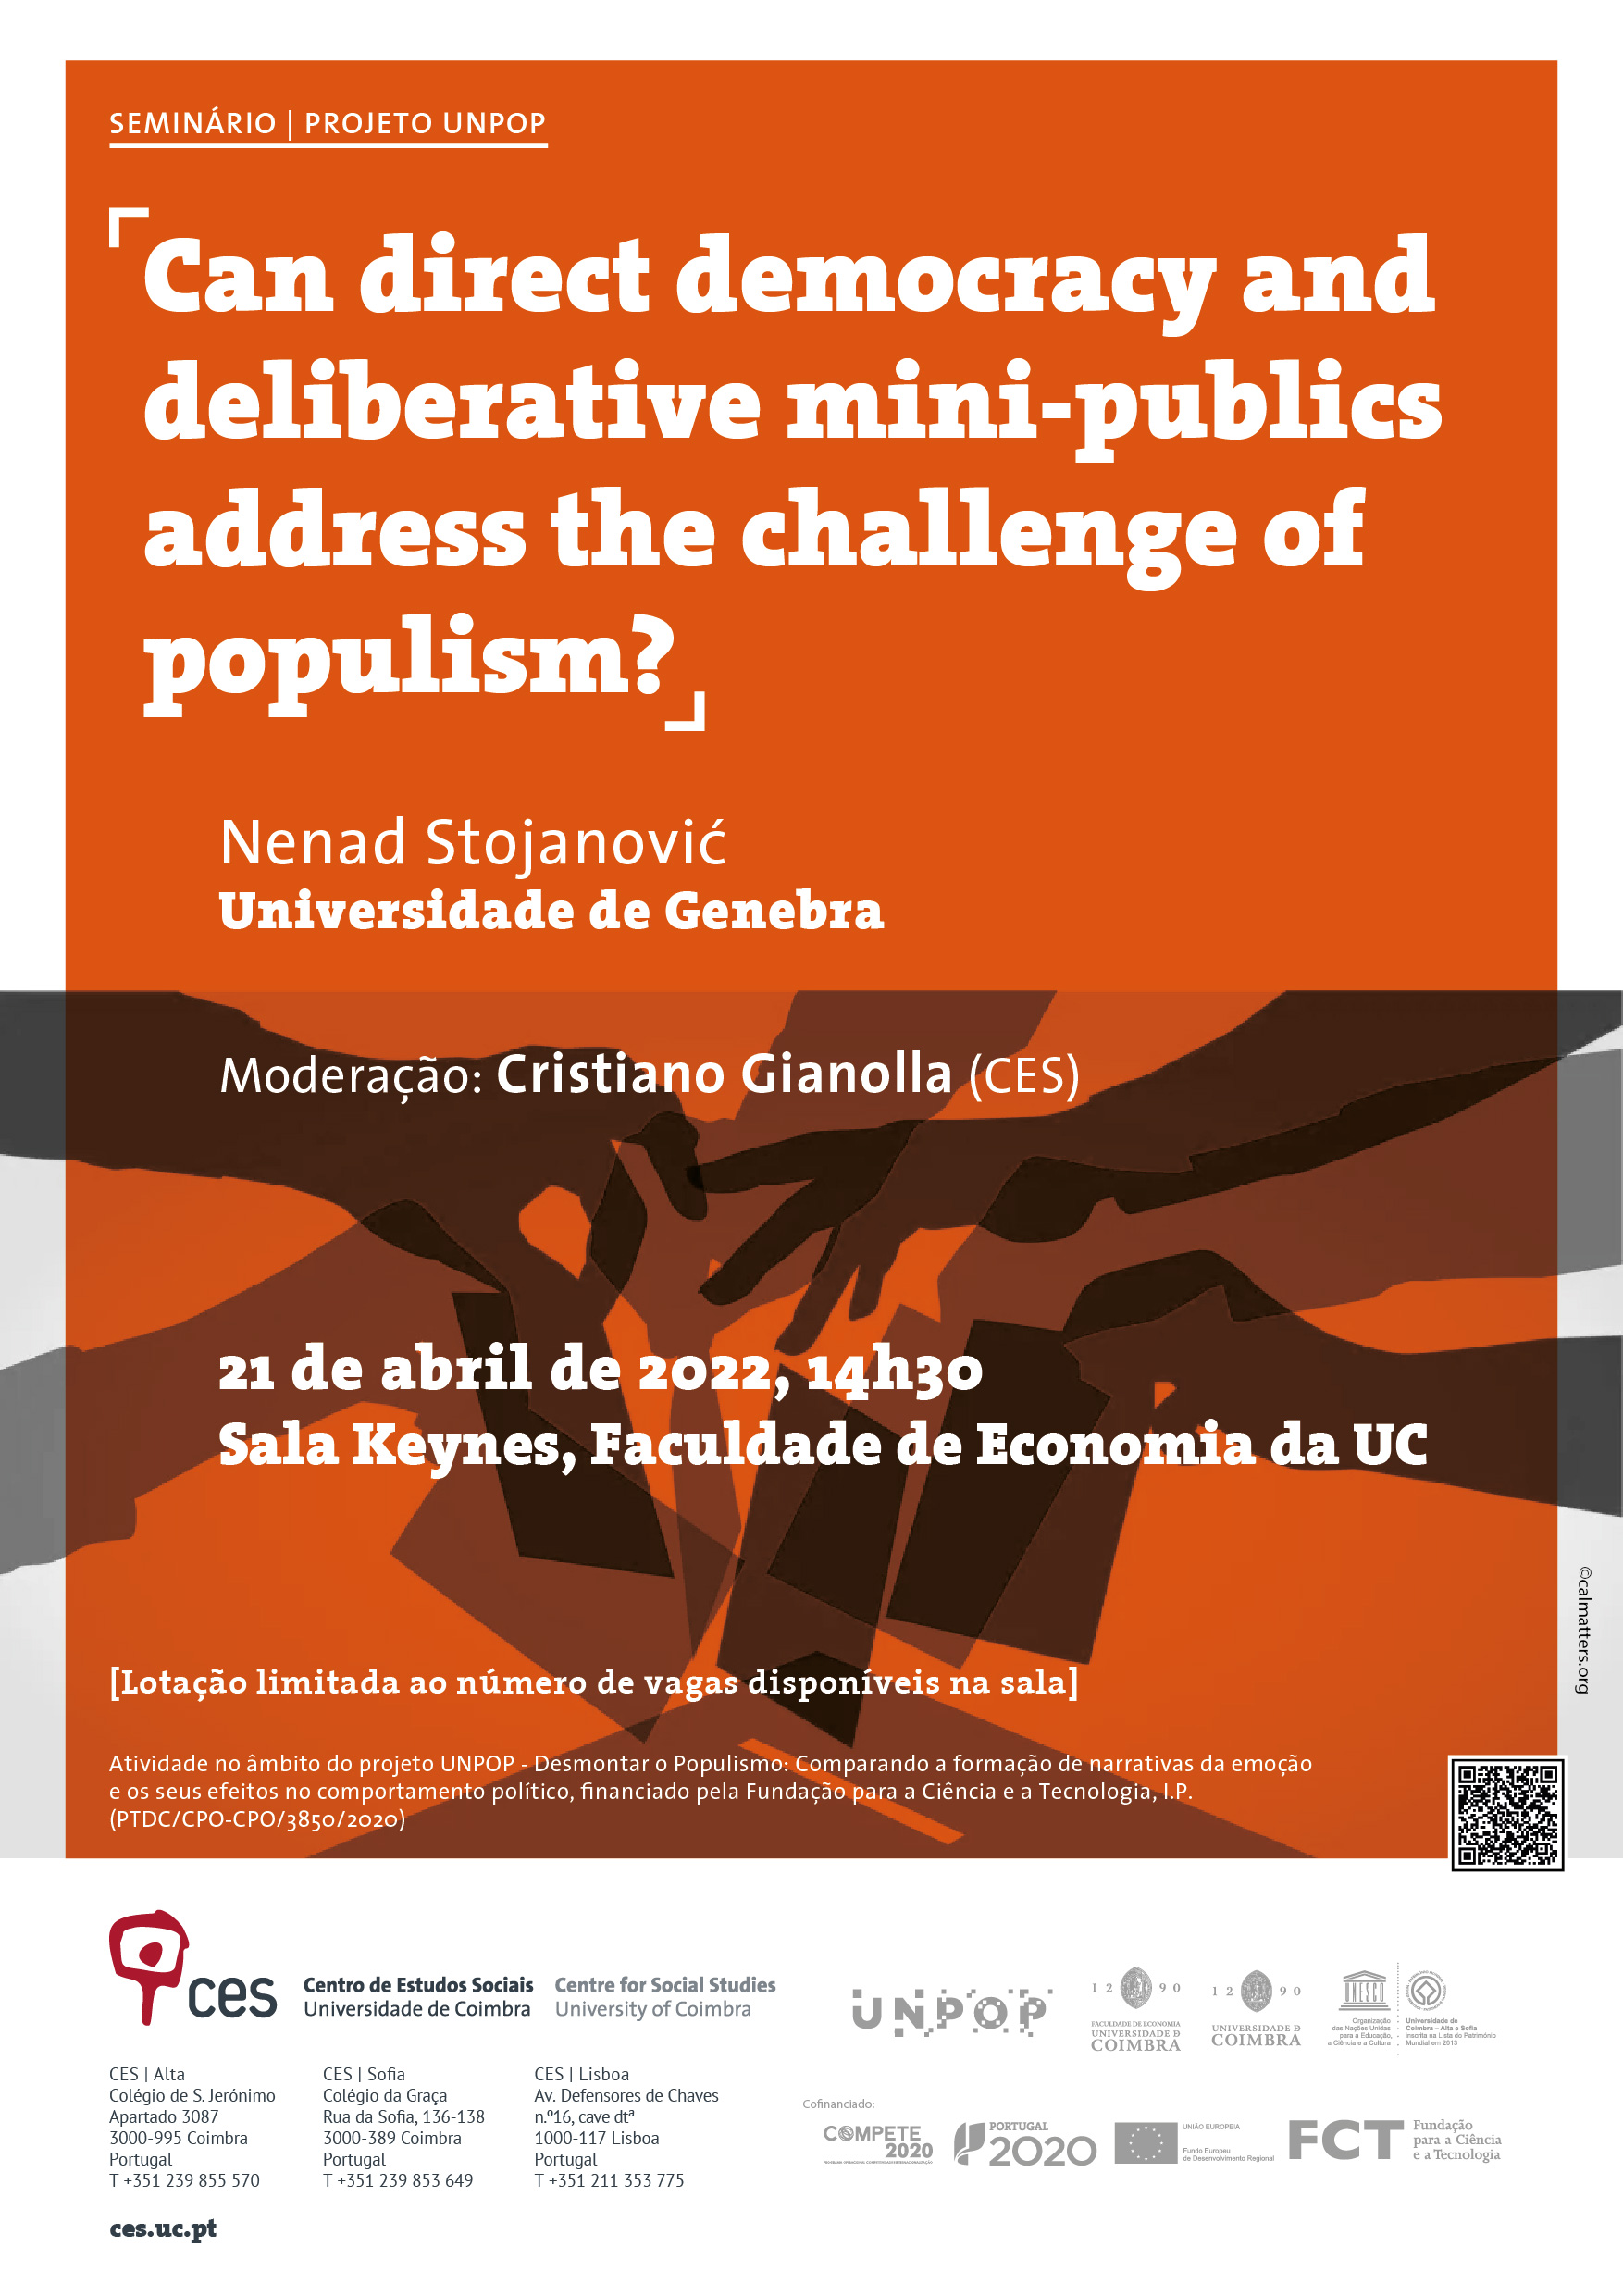 Can direct democracy and deliberative mini-publics address the challenge of populism?<span id="edit_37634"><script>$(function() { $('#edit_37634').load( "/myces/user/editobj.php?tipo=evento&id=37634" ); });</script></span>